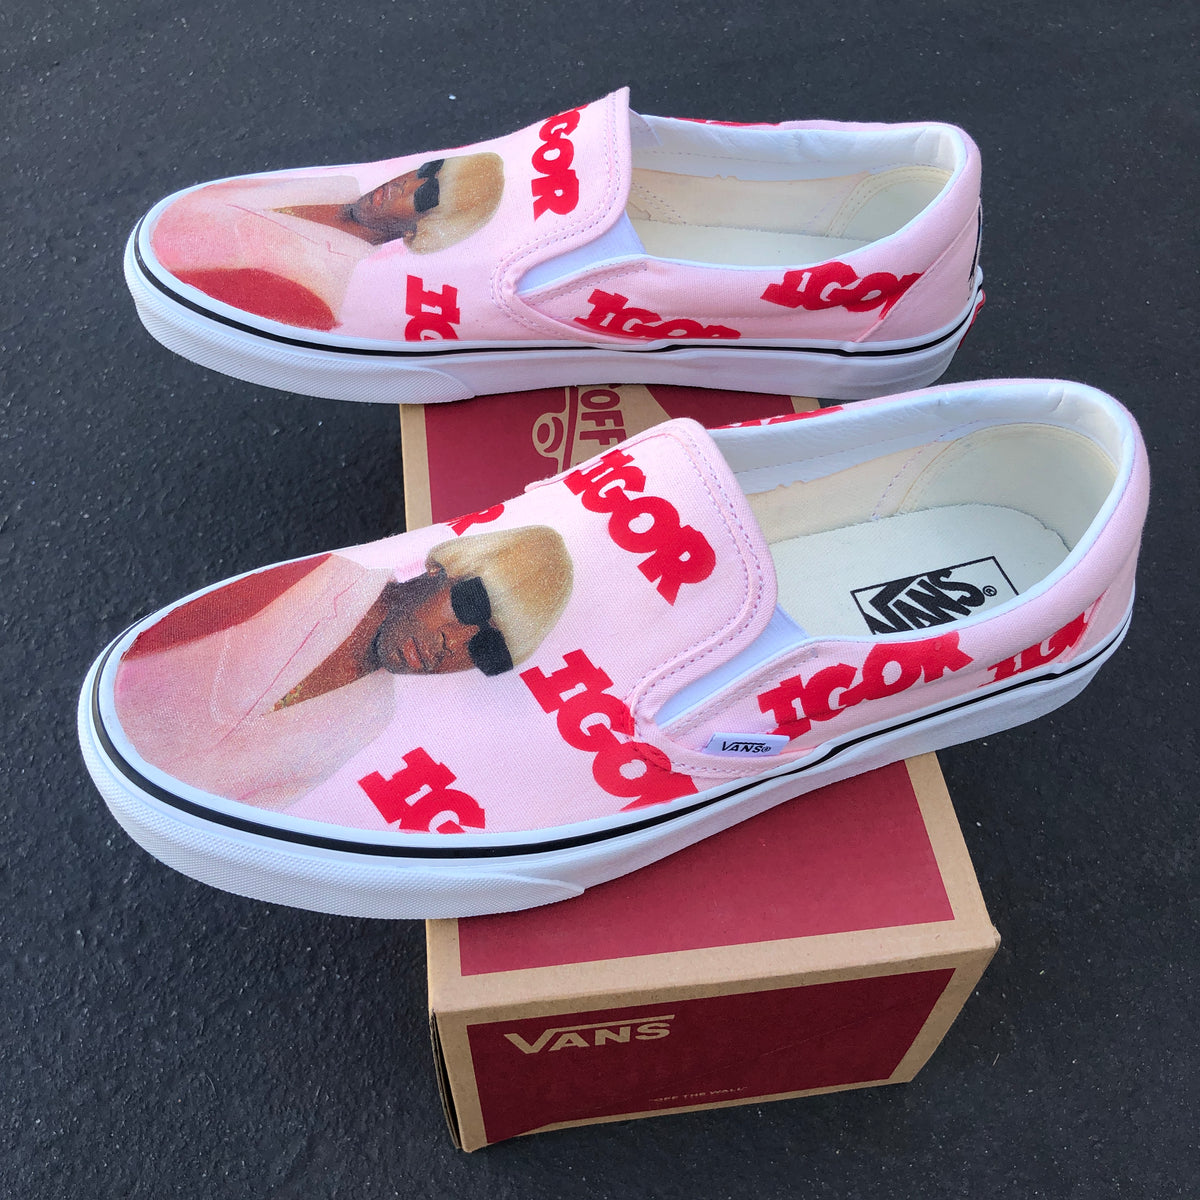 where can you buy tyler the creator vans